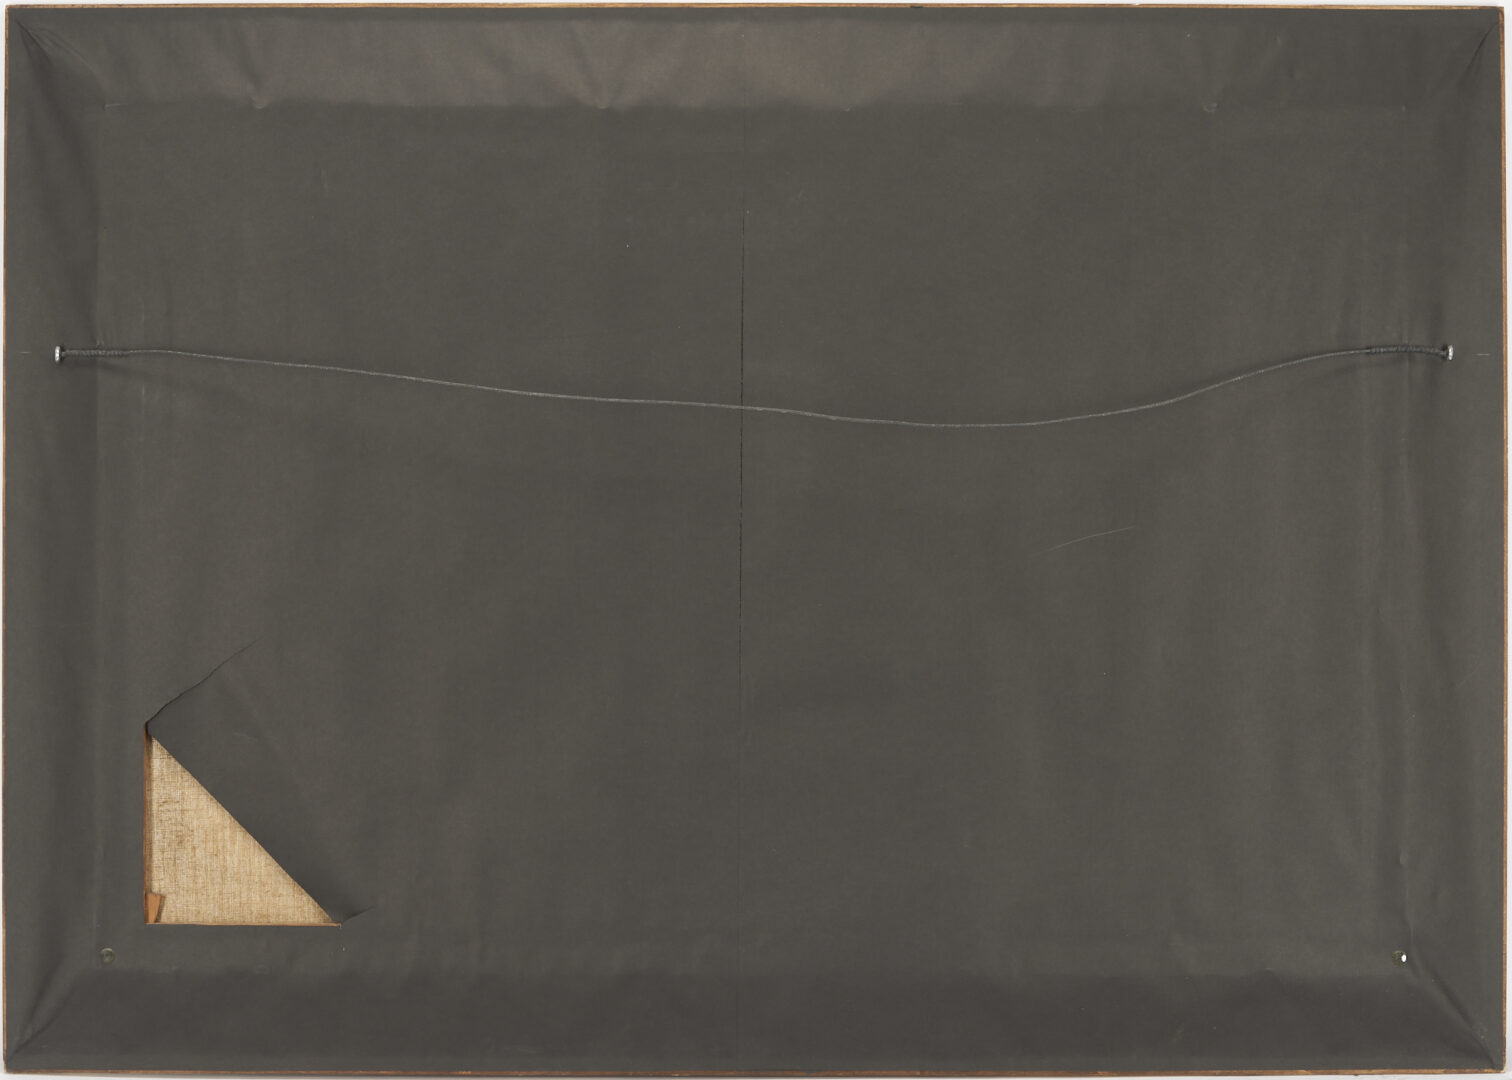 Lot 504: Philip Perkins O/C Large Abstract Painting, Weight of the Horizon, 1944